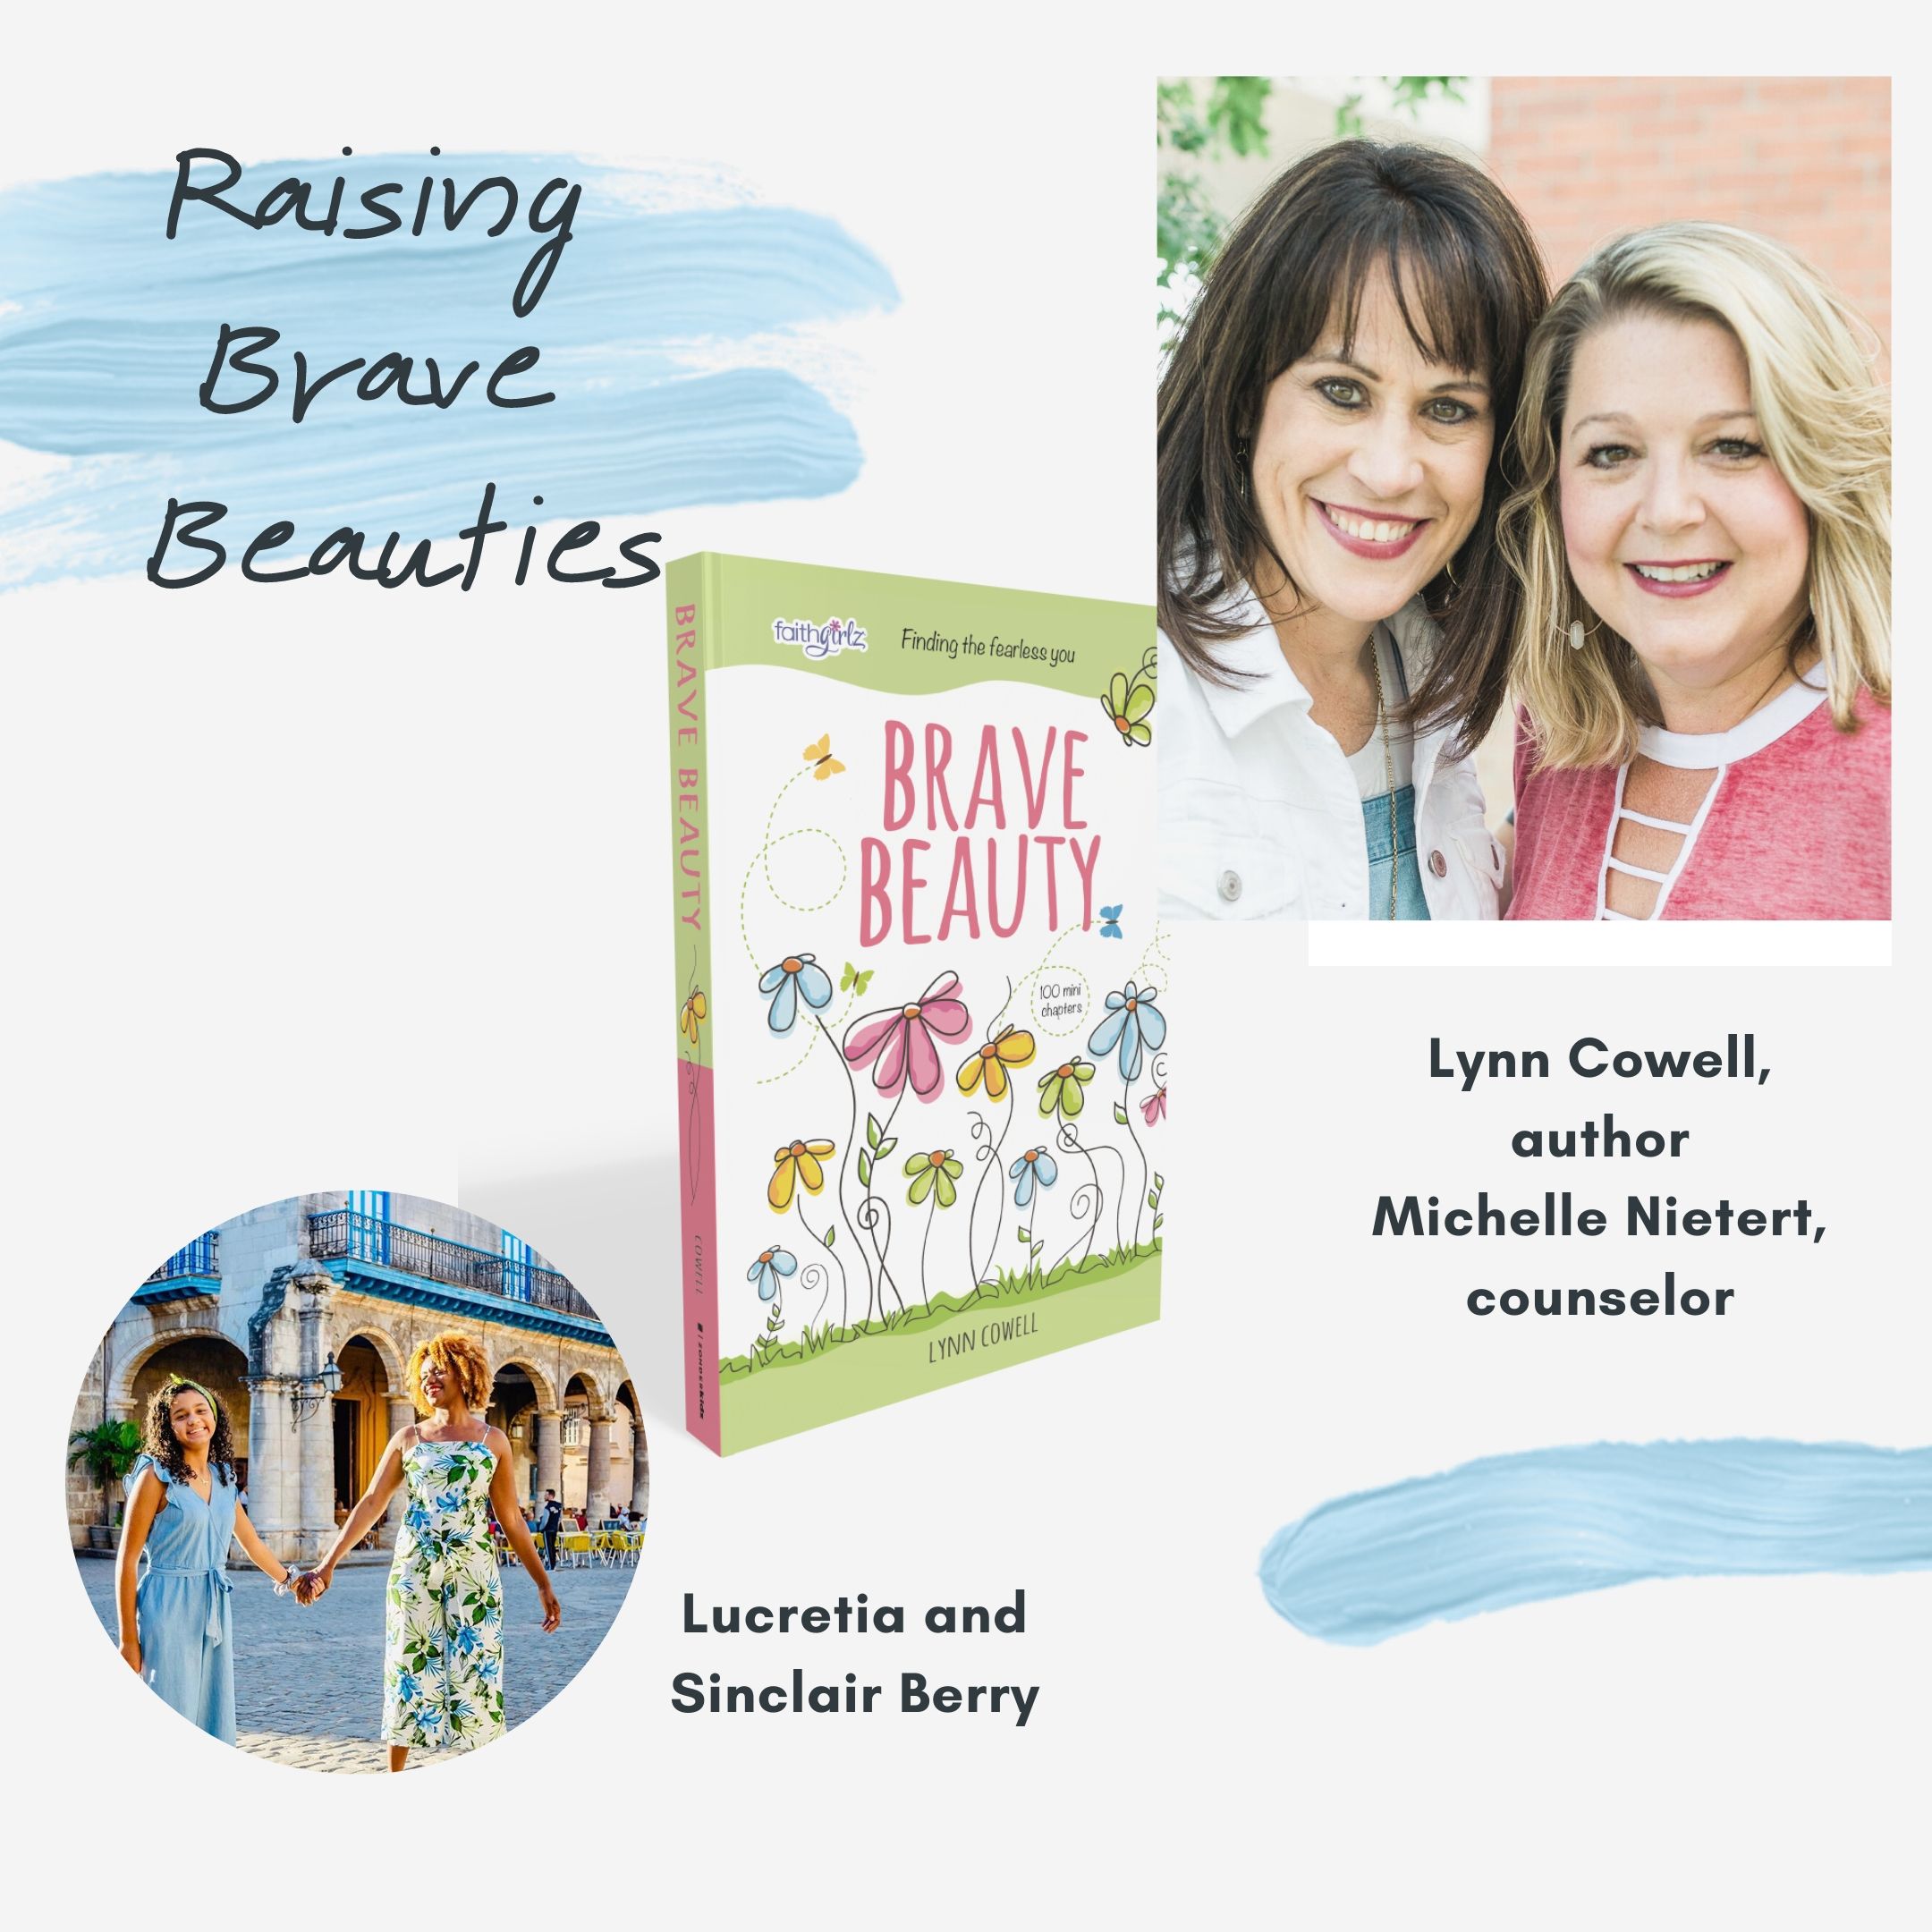 On this episode of Raising Brave Beauties podcast, professional counselor Michelle Nietert and I are joined by Dr. Lucretia Berry of Brownicity and her 13-year-old daughter Sinclair! Dr. Berry lives with her husband and three daughters in North Carolina. She has a PhD in education and is an author, writer, and TED speaker. On this episode, listen in as we talk to the Berrys about: 👨👩👧👧 Multi-ethnic families and appreciations for our differences and similarities  ✝ What God can do if we invest in our children ⏳ Middle school - a strange time in life and the challenges that come with it 👩🏫 Surrendering in the process of learning; allowing God to be our children's teacher Listen wherever you listen to your podcasts!  Our devotional book for young girls “Loved and Cherished: 100 Devotionals for Girls” makes the perfect Christmas gift this year! Give the gift of knowing she is deeply and forever loved ... just as she is! Available on Amazon or at lovedandcherished.me 🌸✨📚